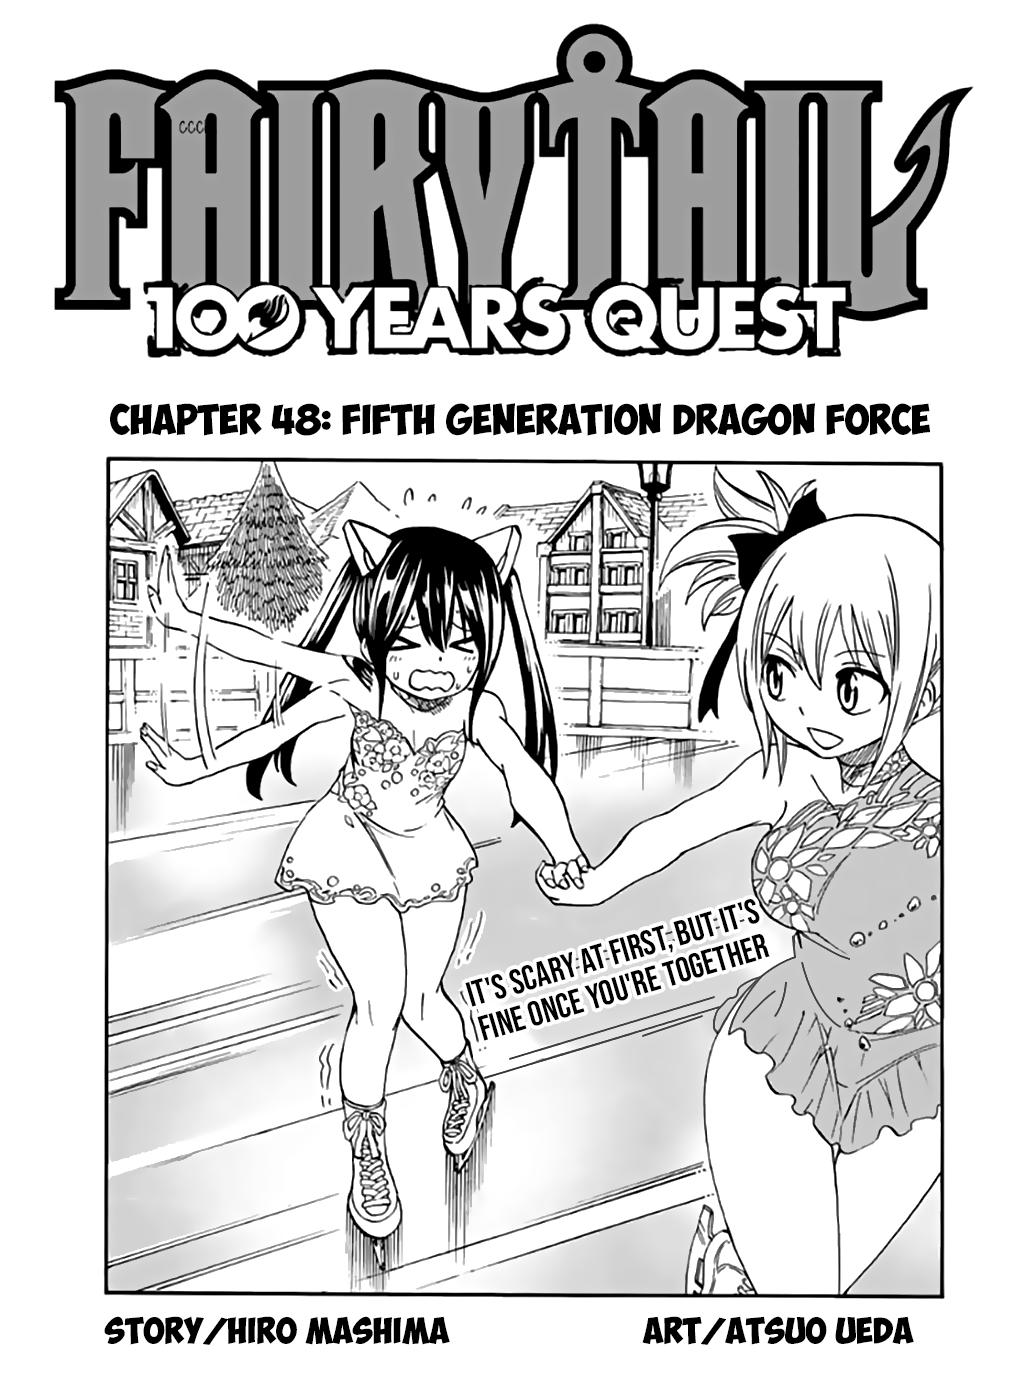 Fairy Tail: 100 Years Quest Chapter 119, Fairy Tail Wiki